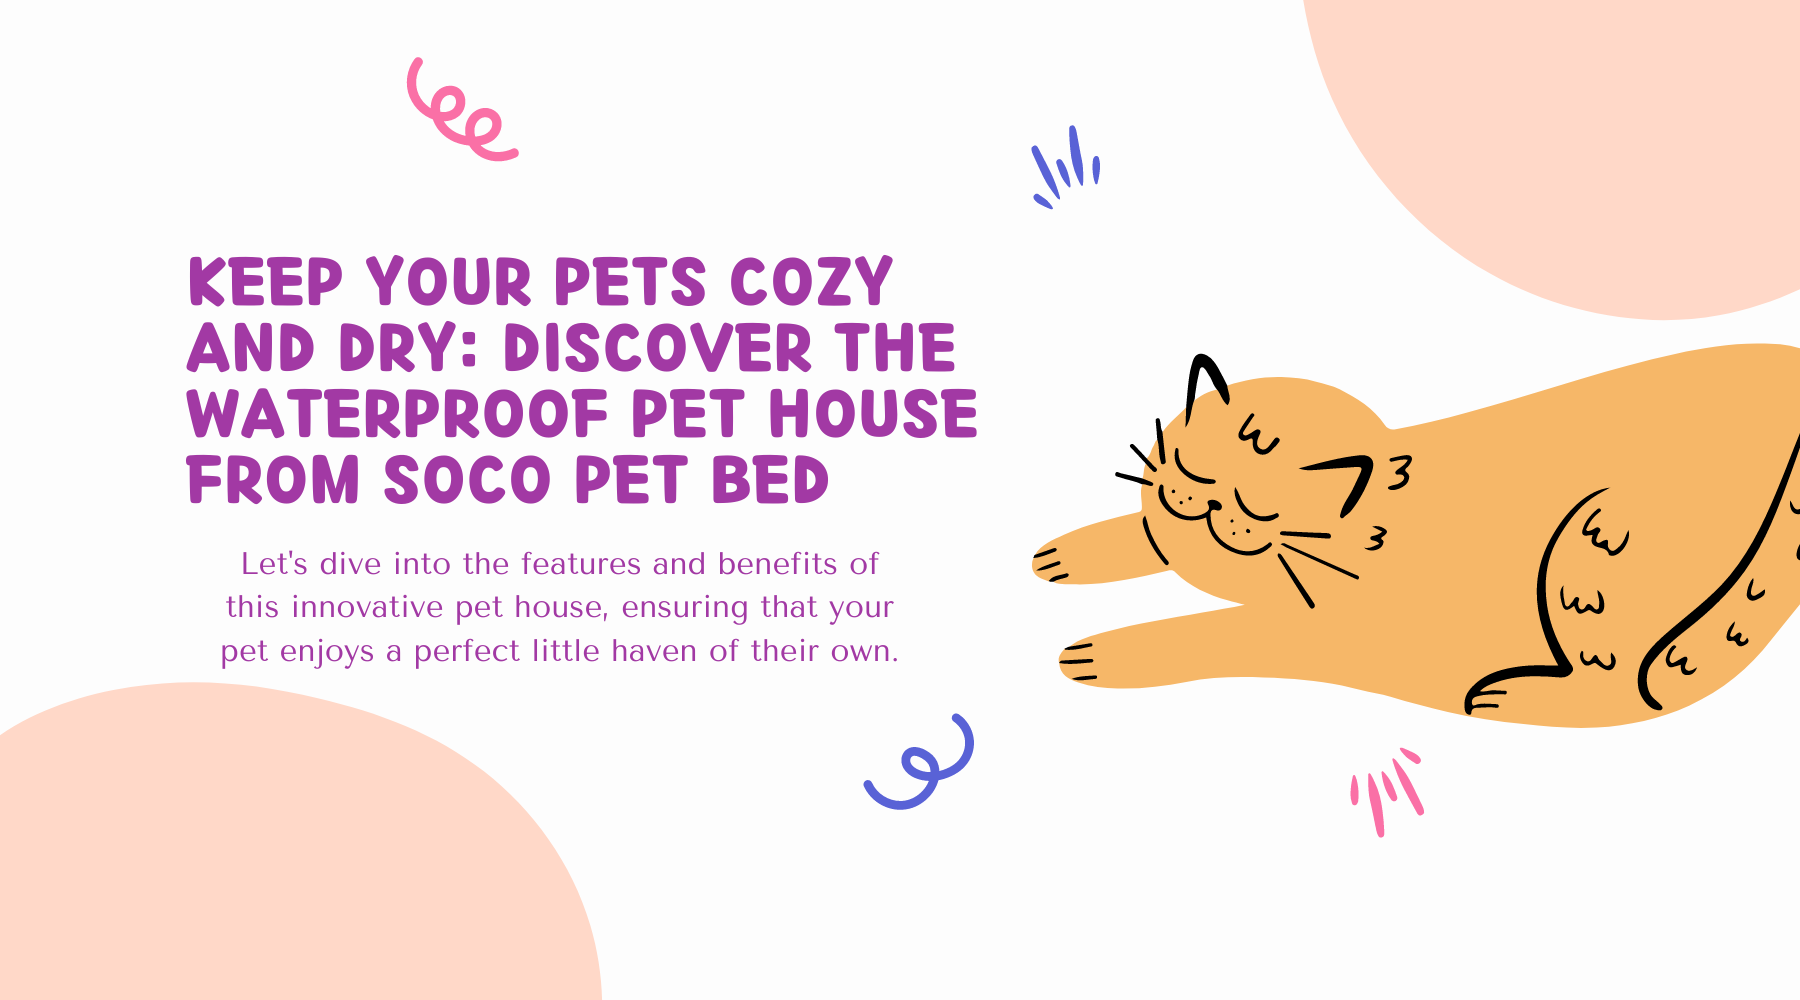 Keep Your Pets Cozy and Dry: Discover the Waterproof Pet House from Soco Pet Bed